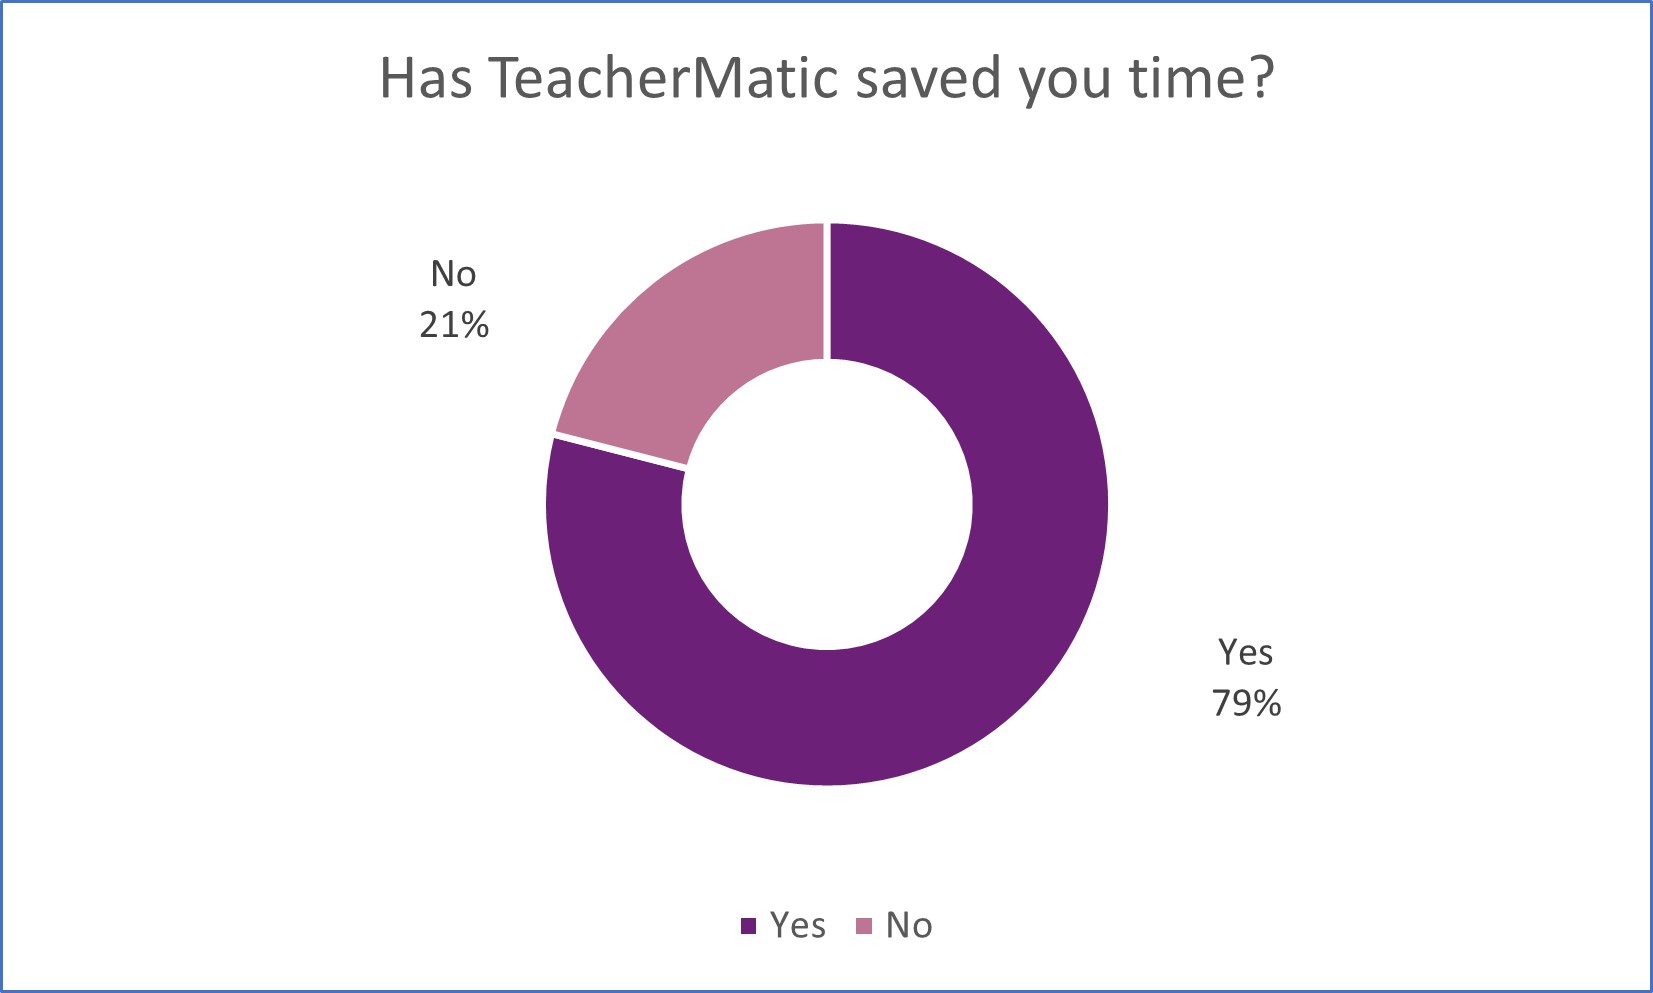 A pie chart showing the results when as if TeacherMatic had saved time. 79% said Yes, 21% said No.